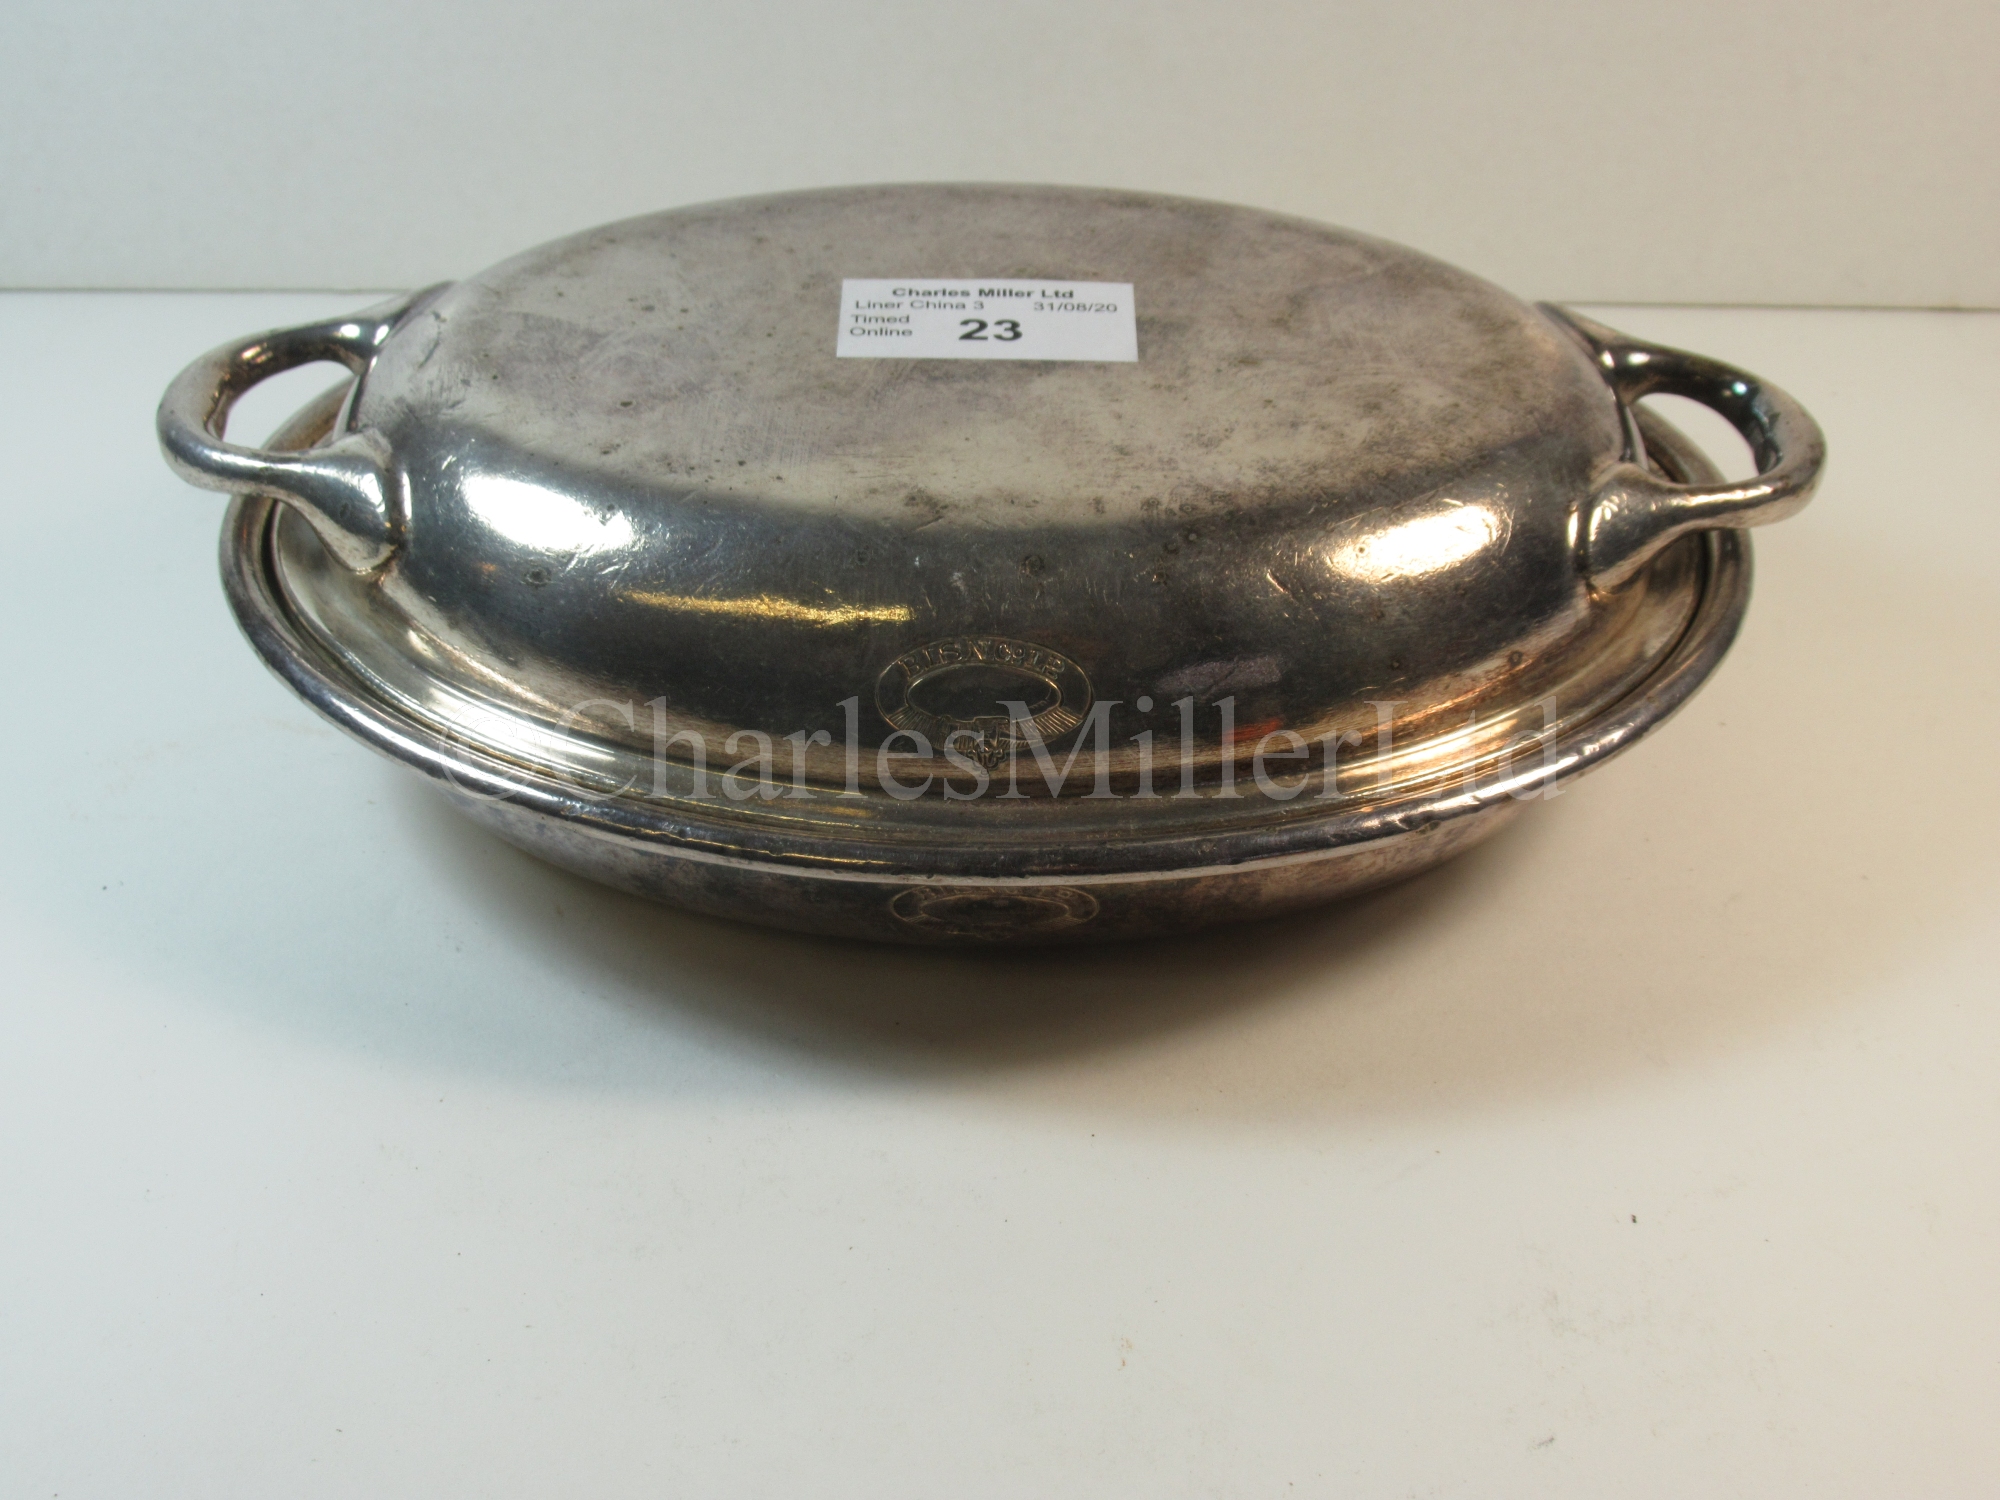 A British India Steam Navigation Company plated tureen and cover